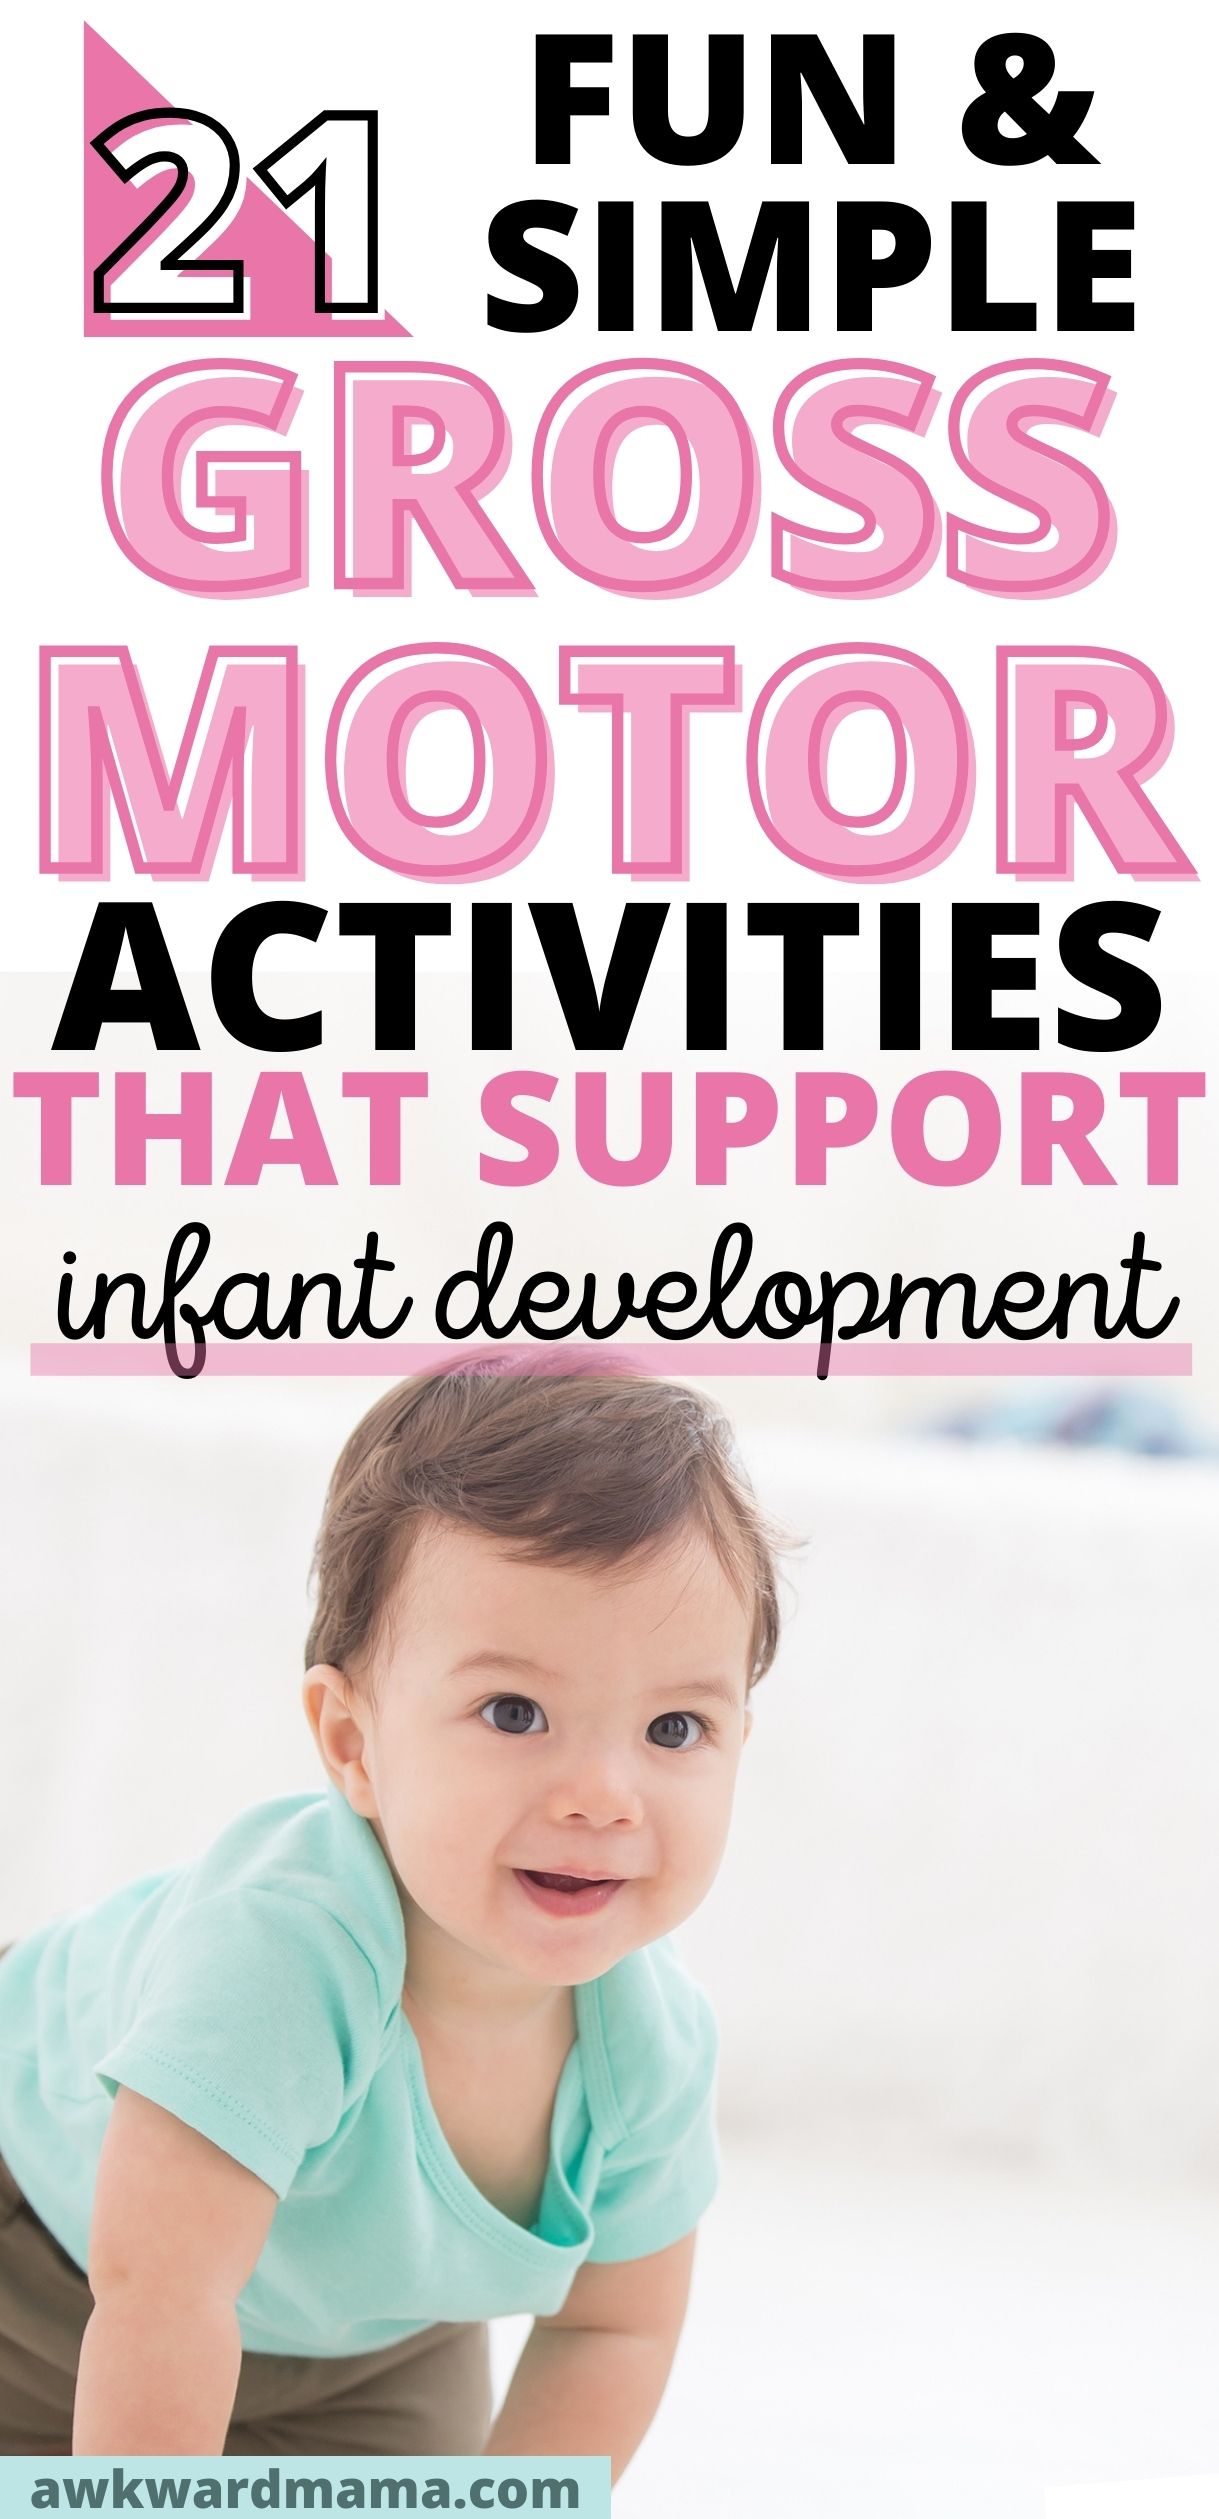 Baby crawling on the floor with text that reads 21 fun and simple gross motor activities that support infant development.